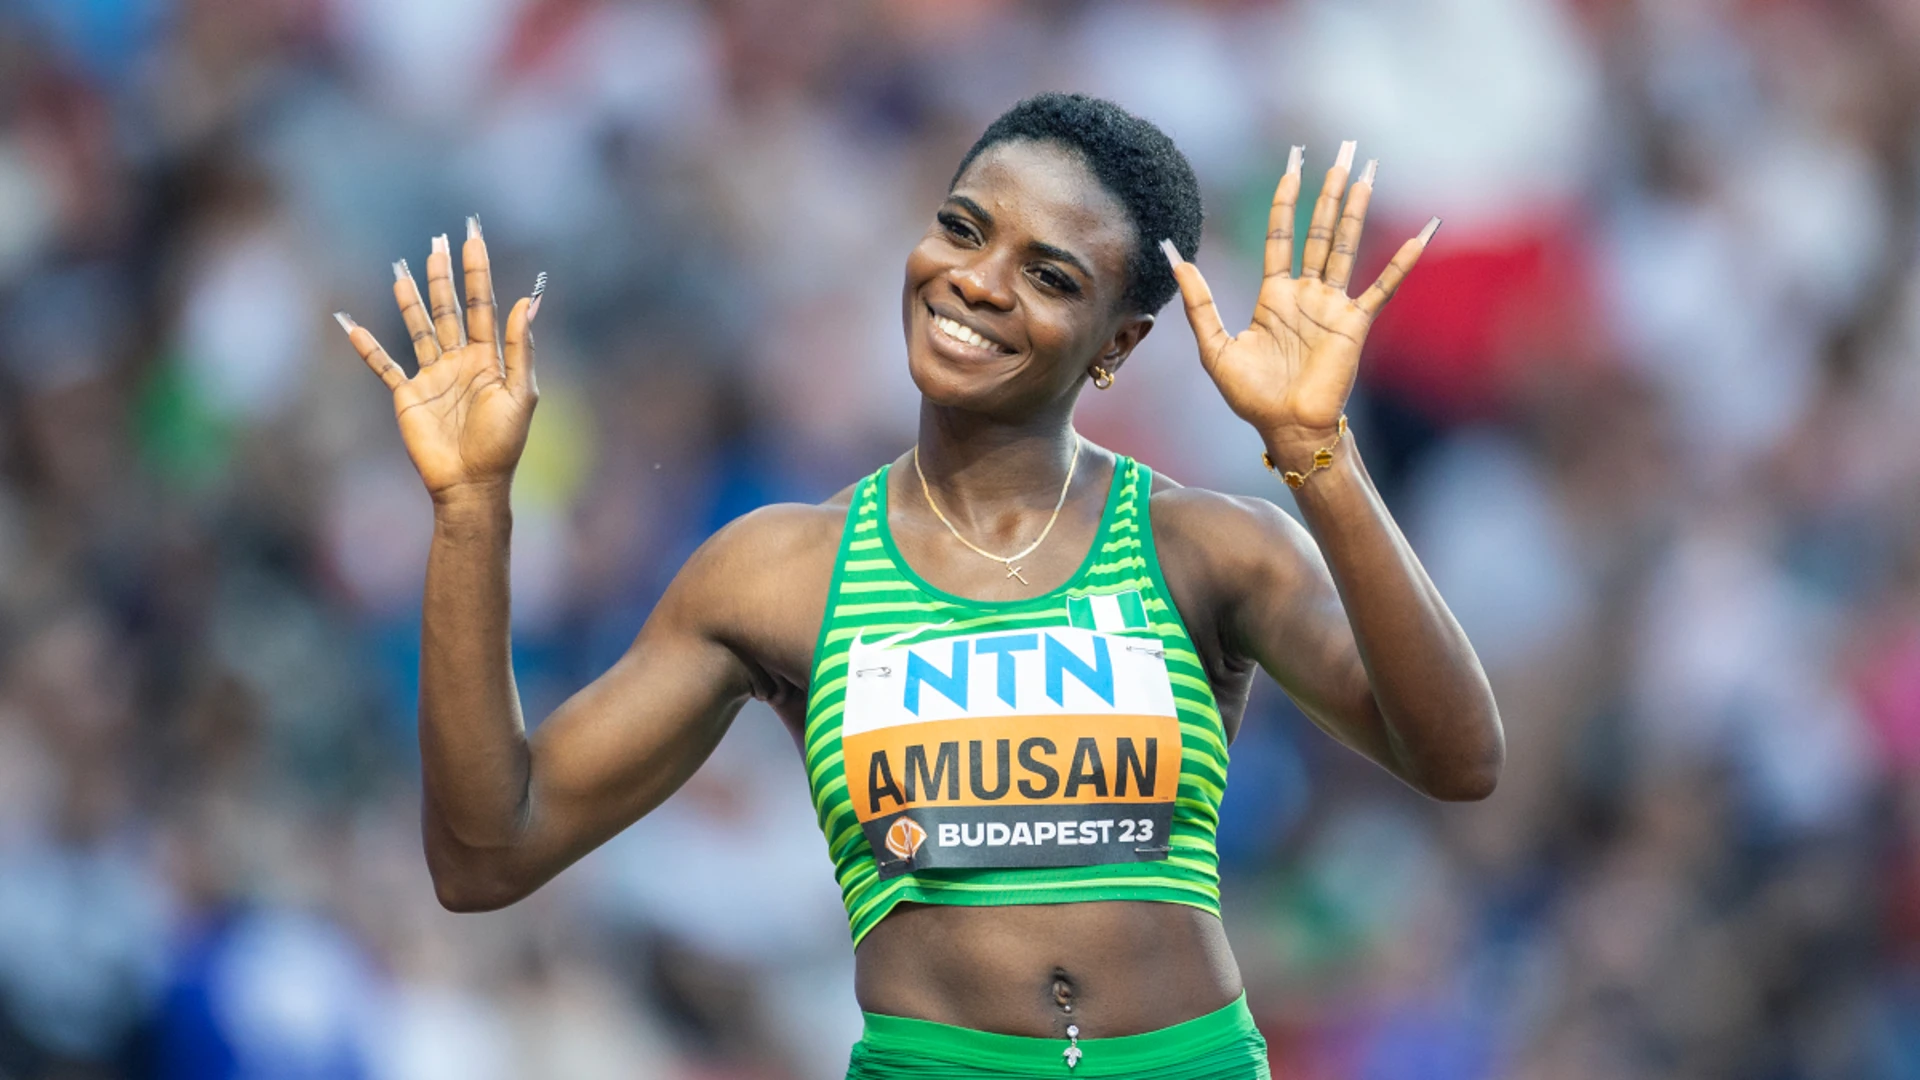 Hurdles world record holder Amusan cleared for Olympics